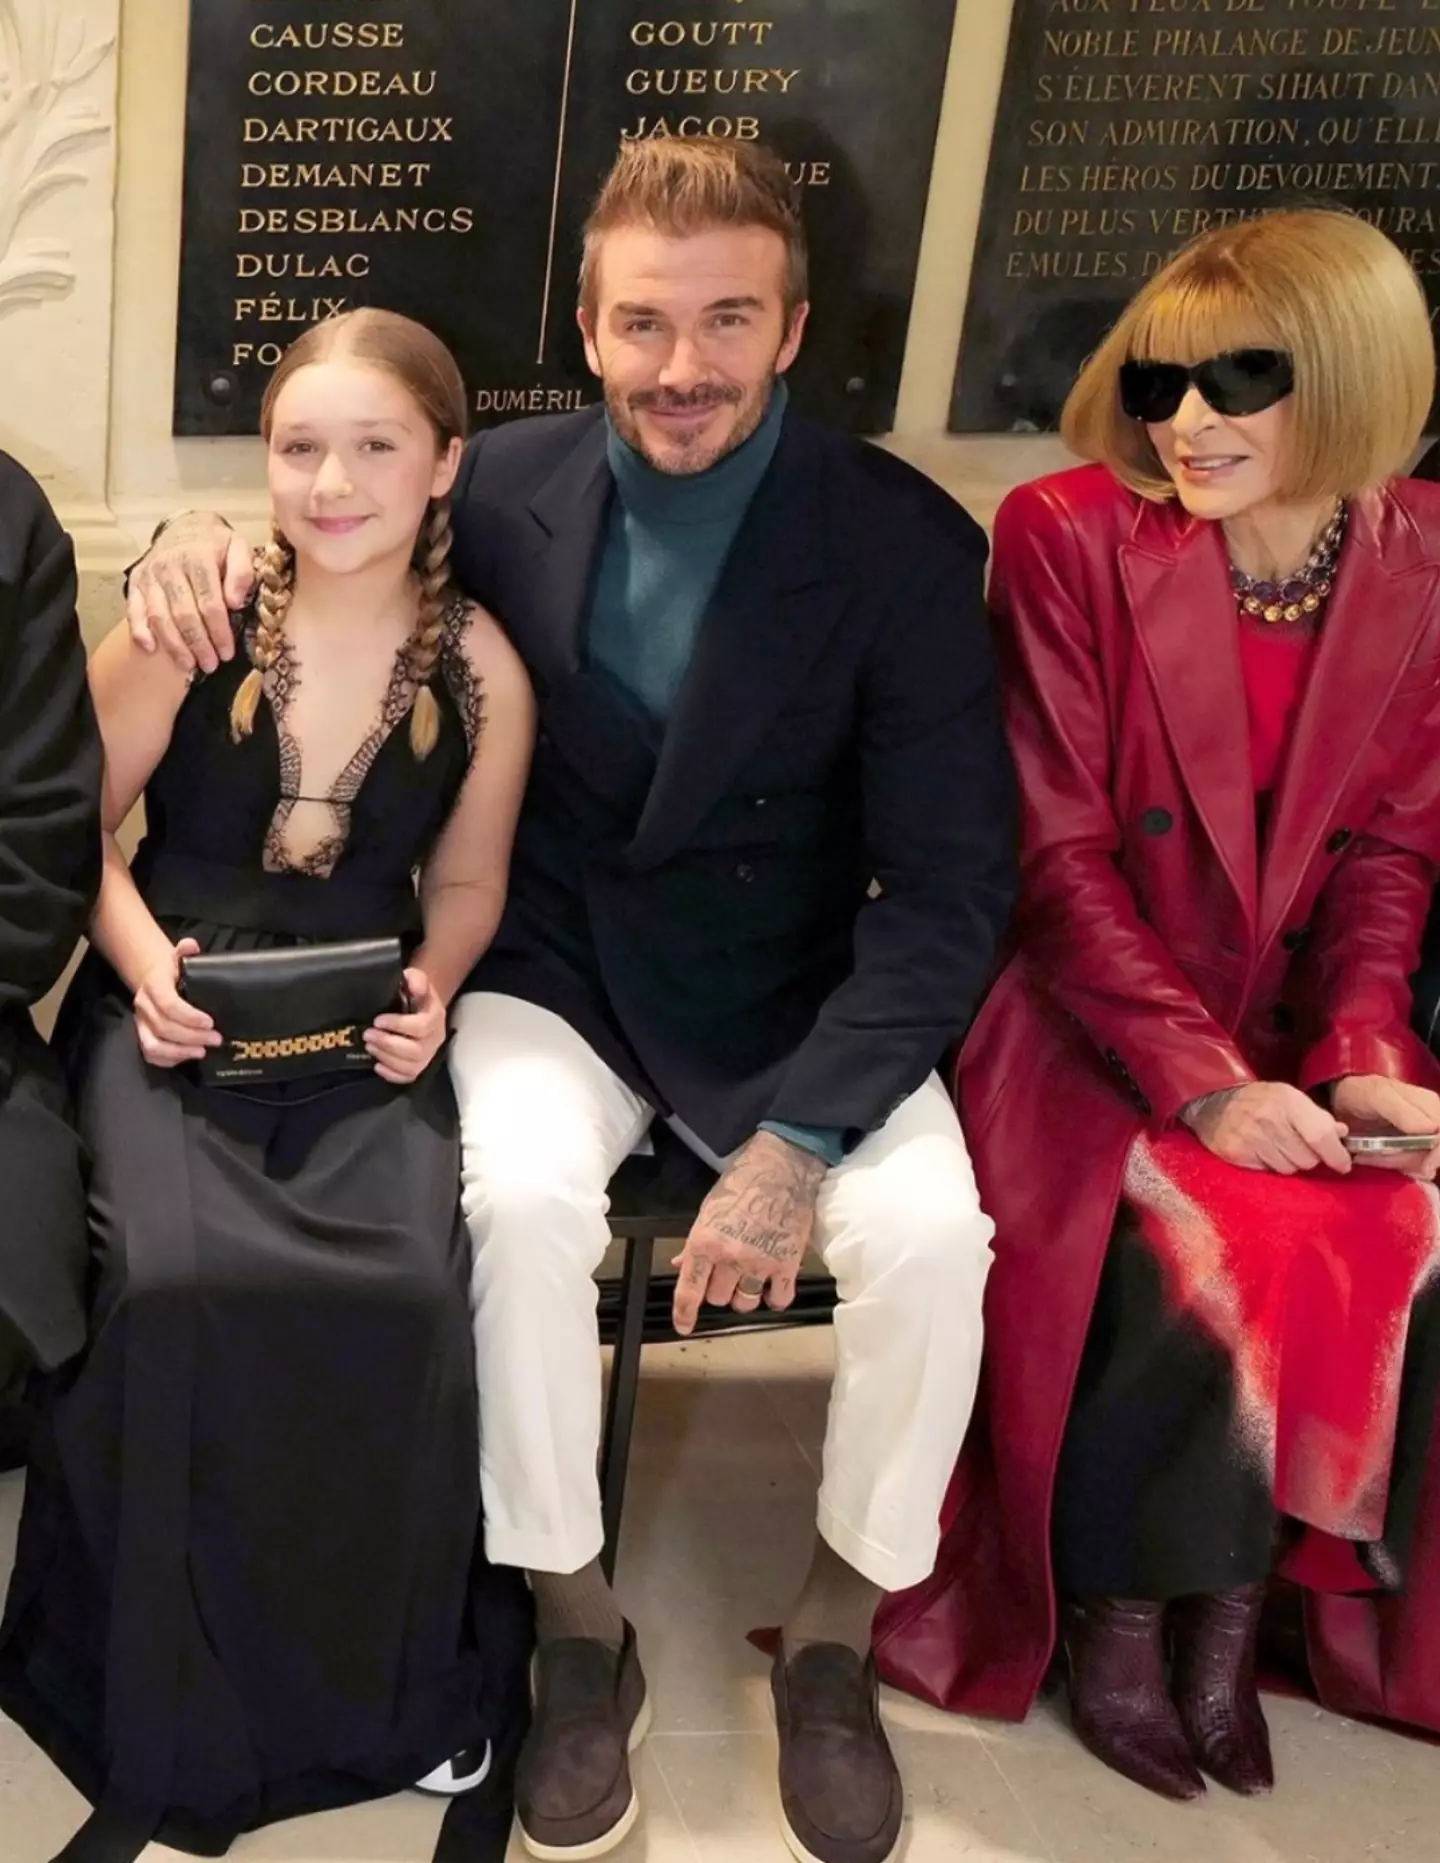 Victoria and David Beckham have been slammed by fans over their 11-year-old daughter’s ‘inappropriate’ outfit.